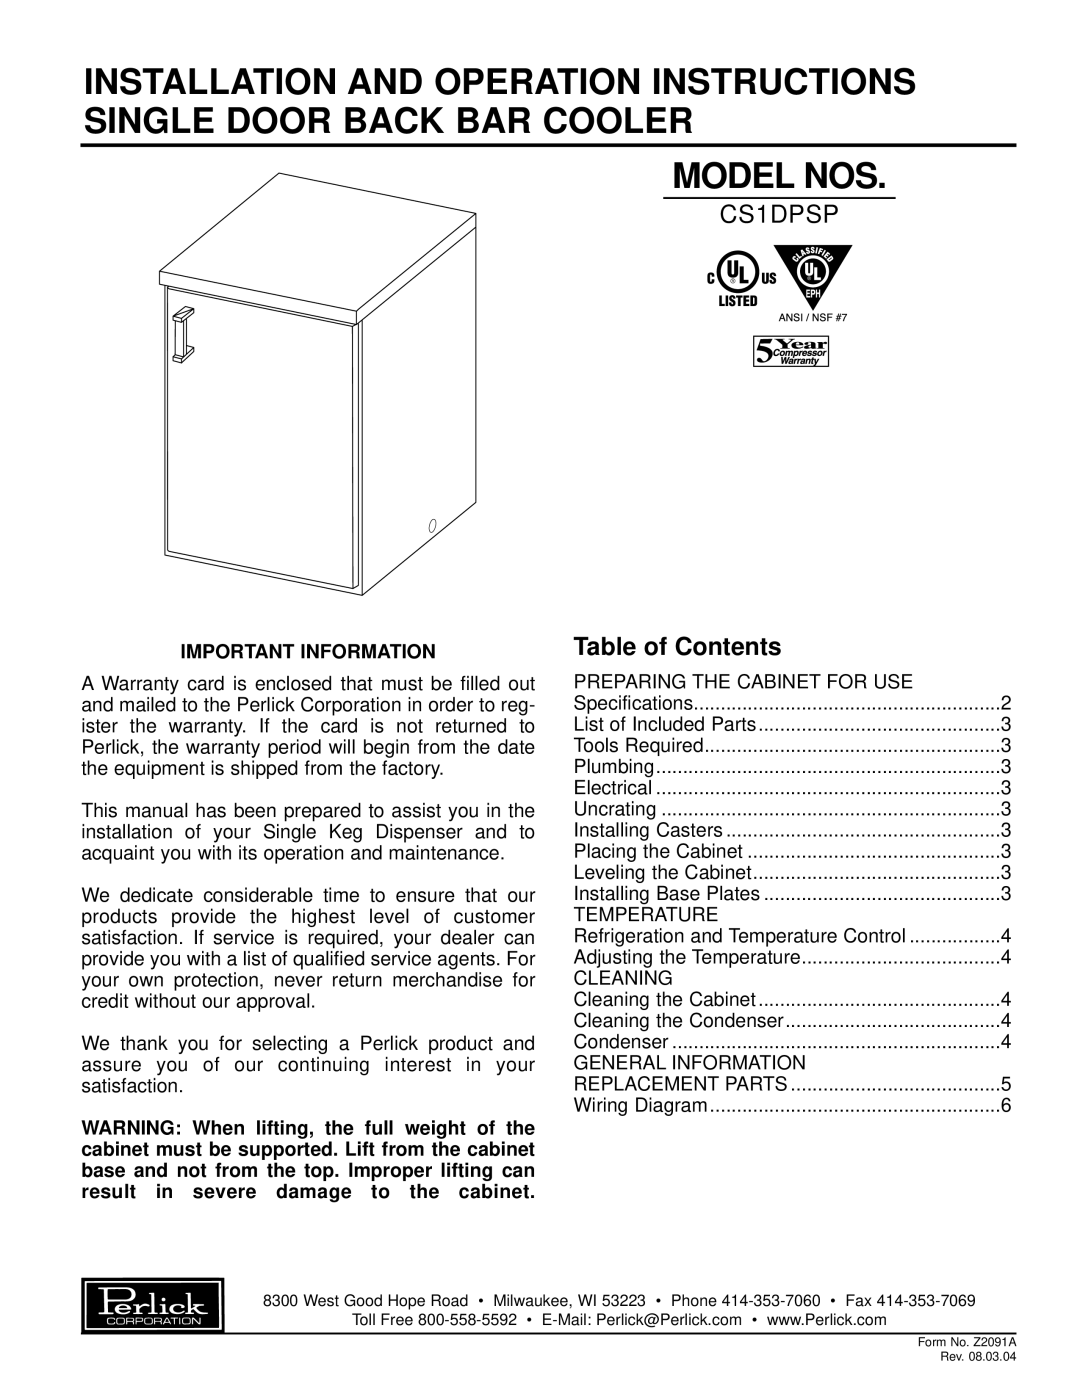 Perlick CS1DPSP specifications Important Information, Model Nos, Table of Contents 